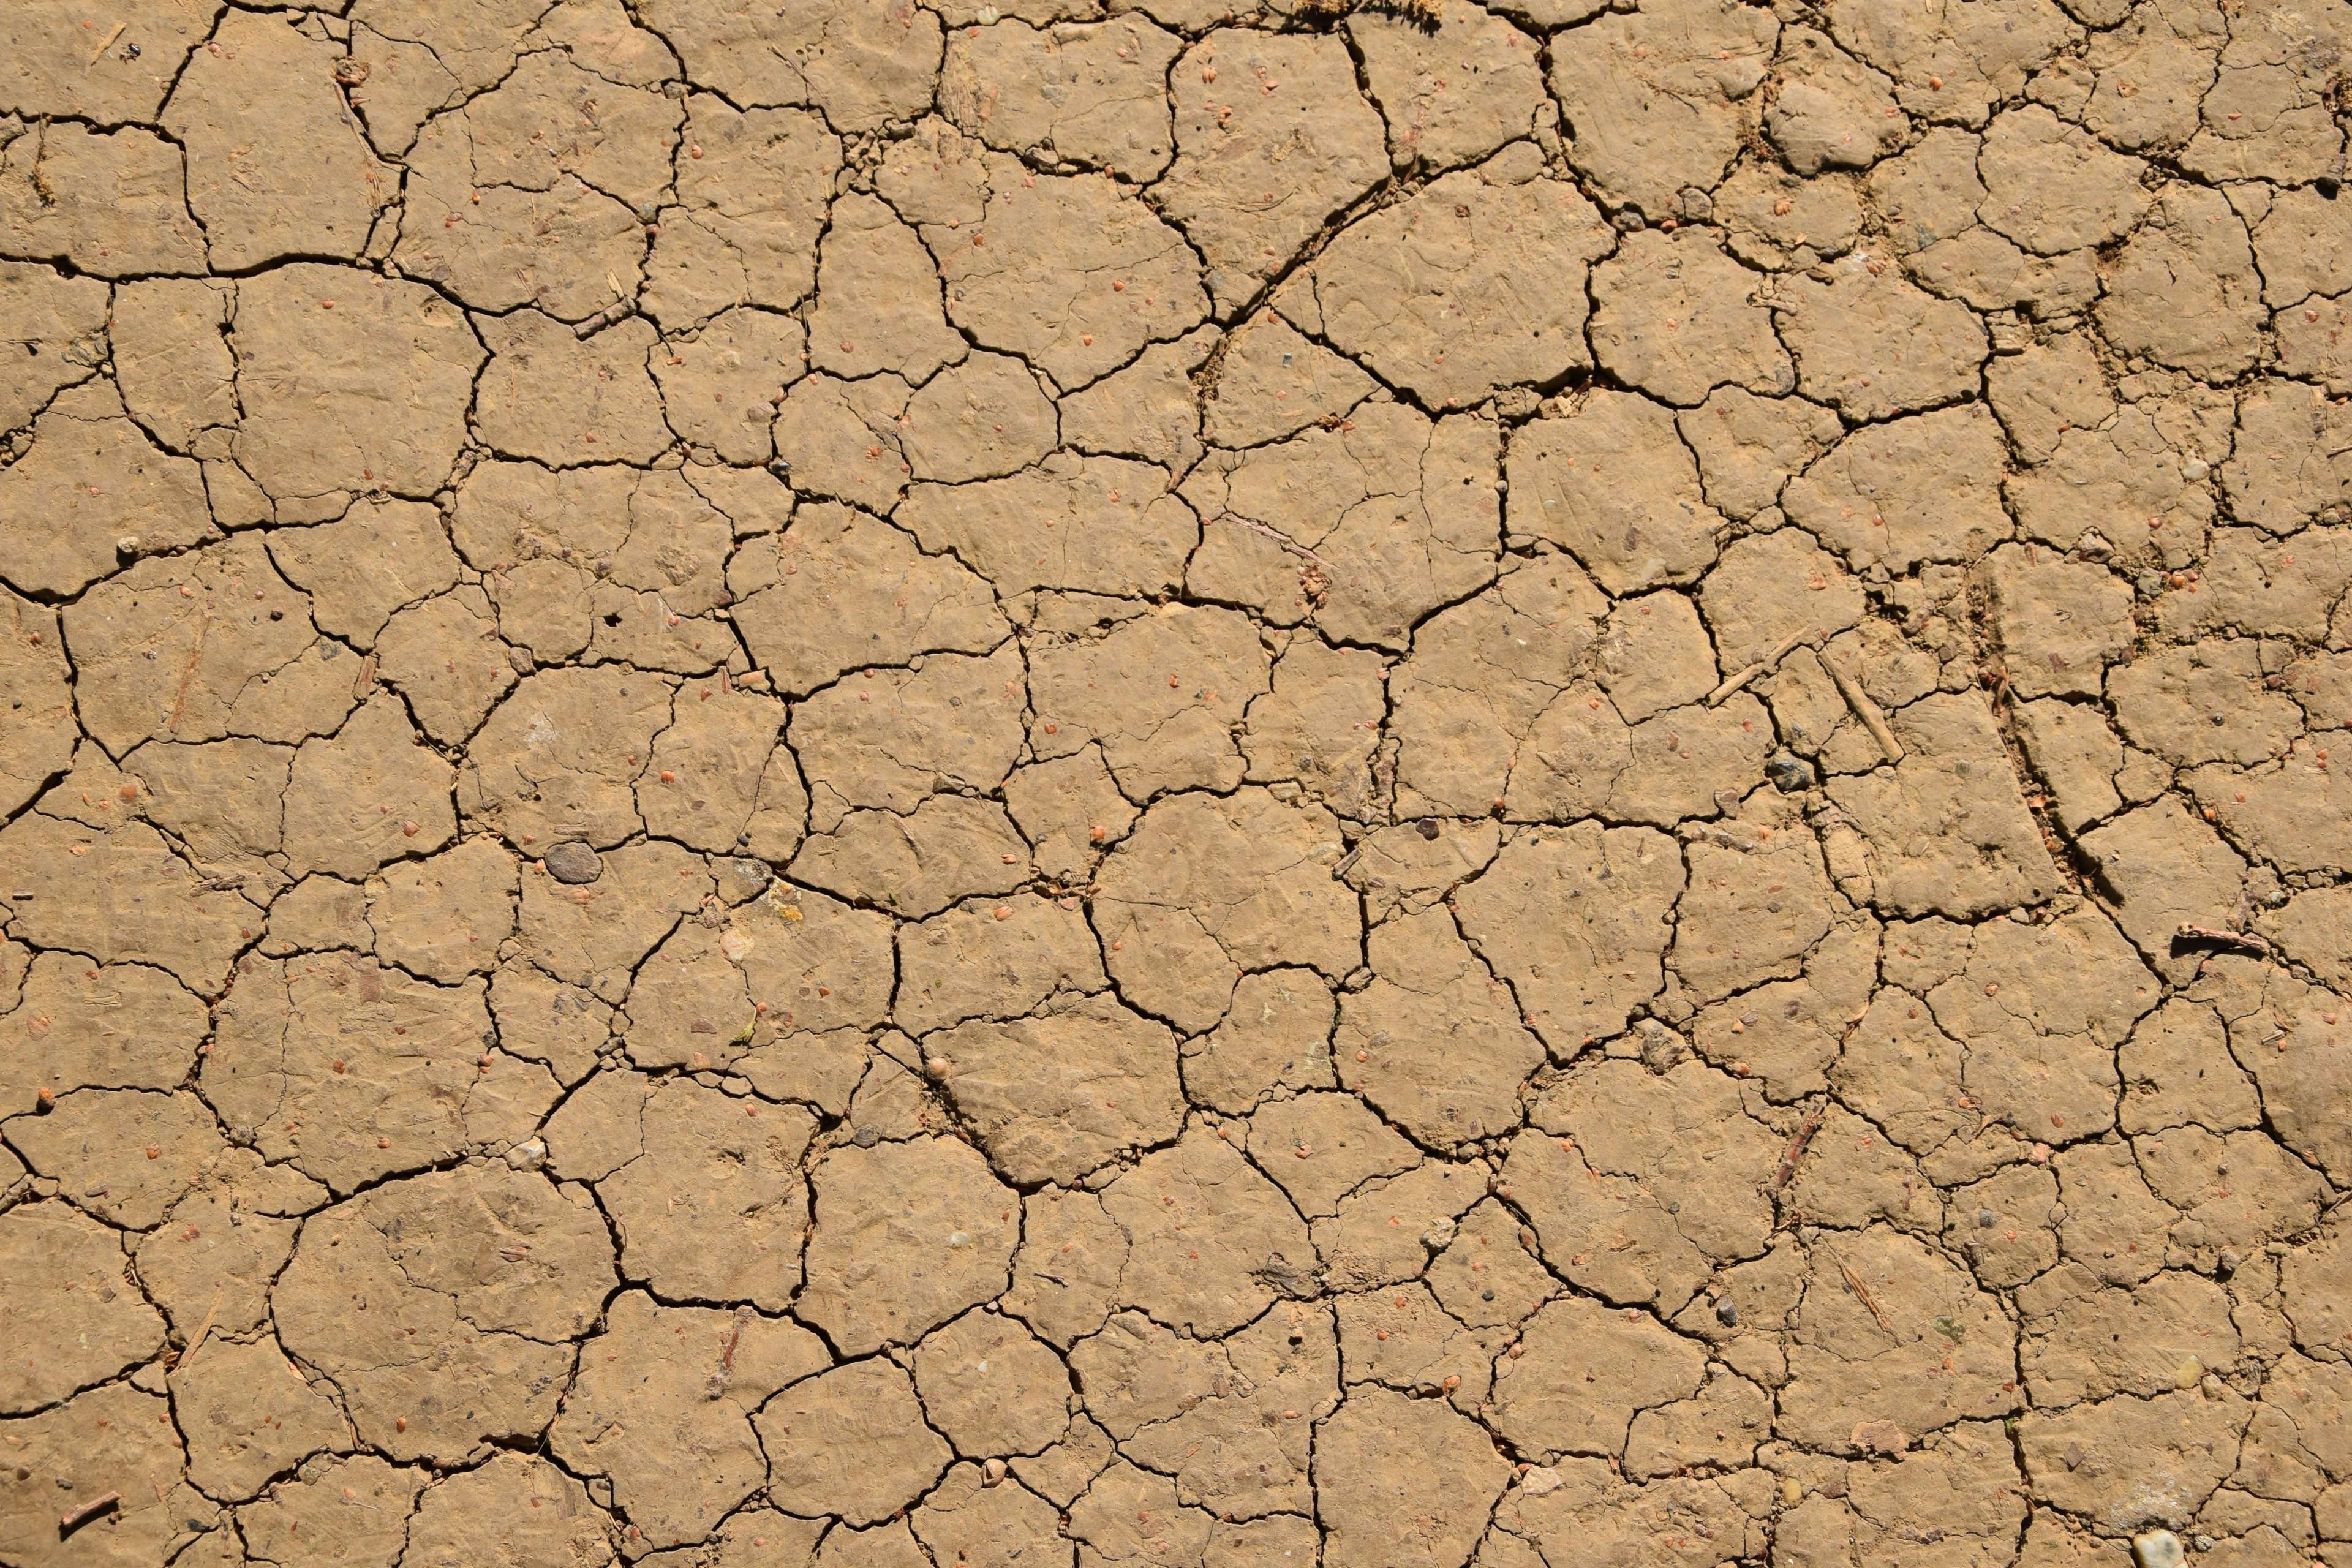 brown #dirt #earth #ground #land #nature #soil #surface #texture ...